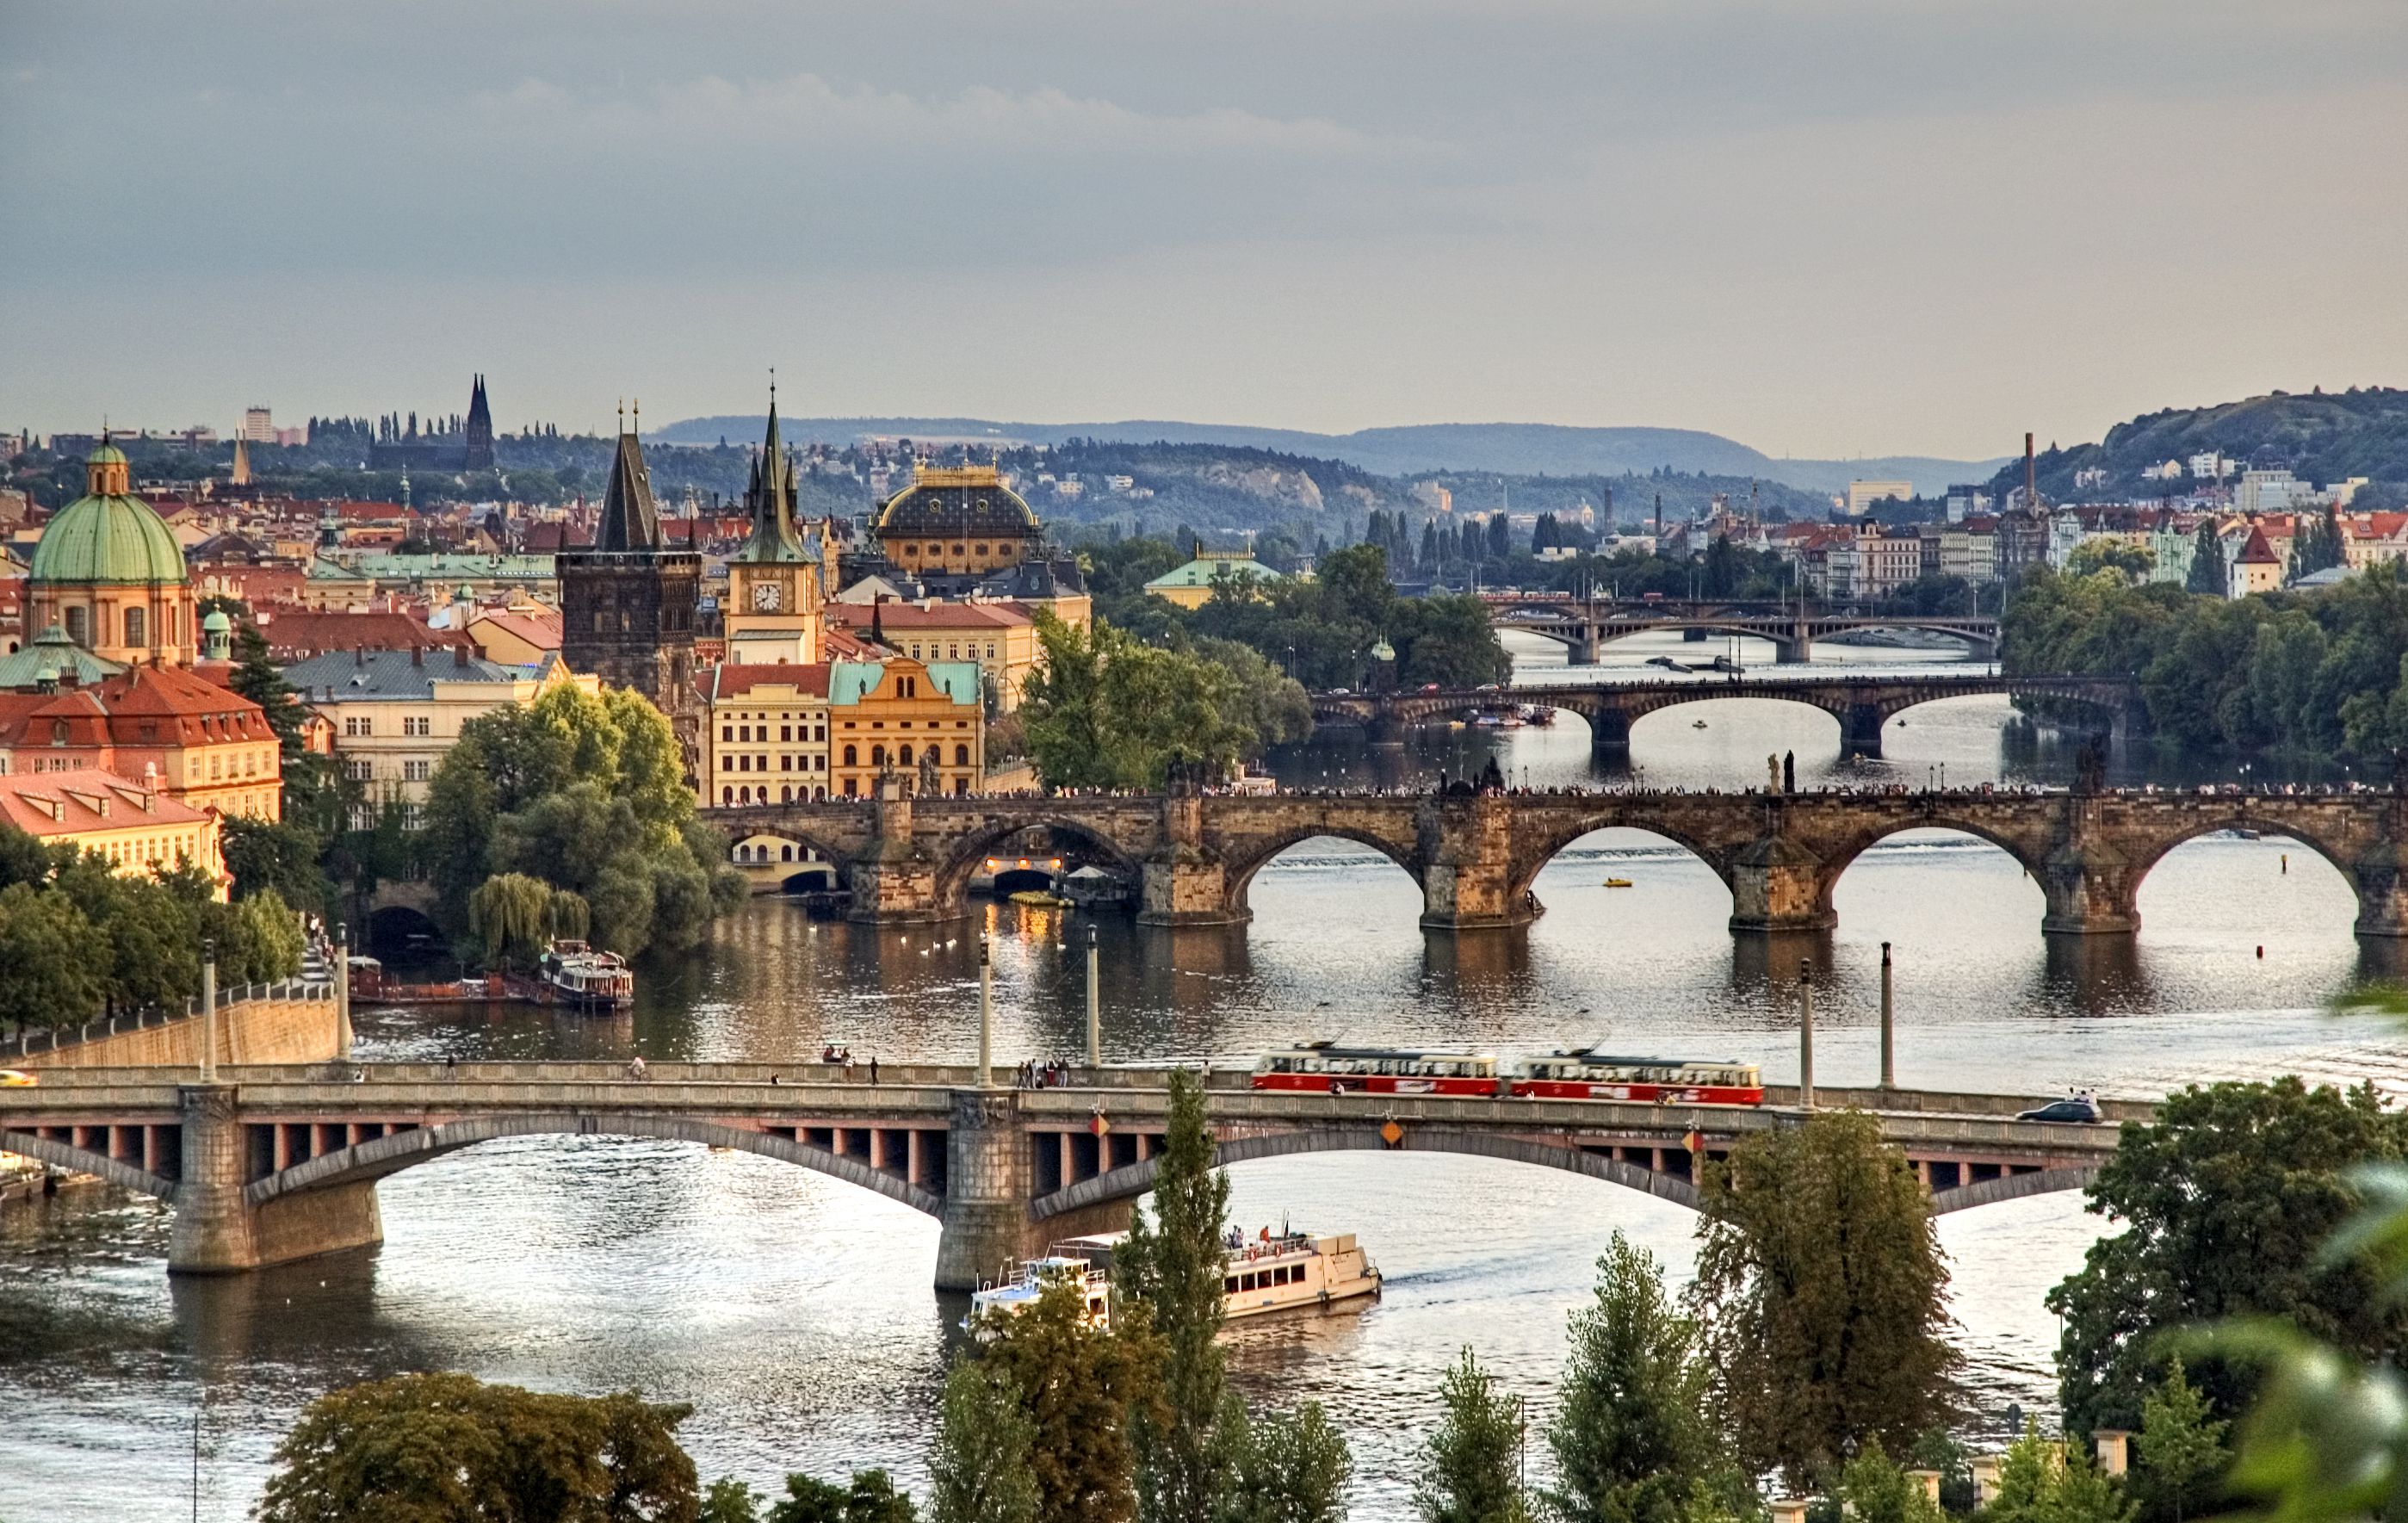 Plan to Visit City of Prague with United Airlines